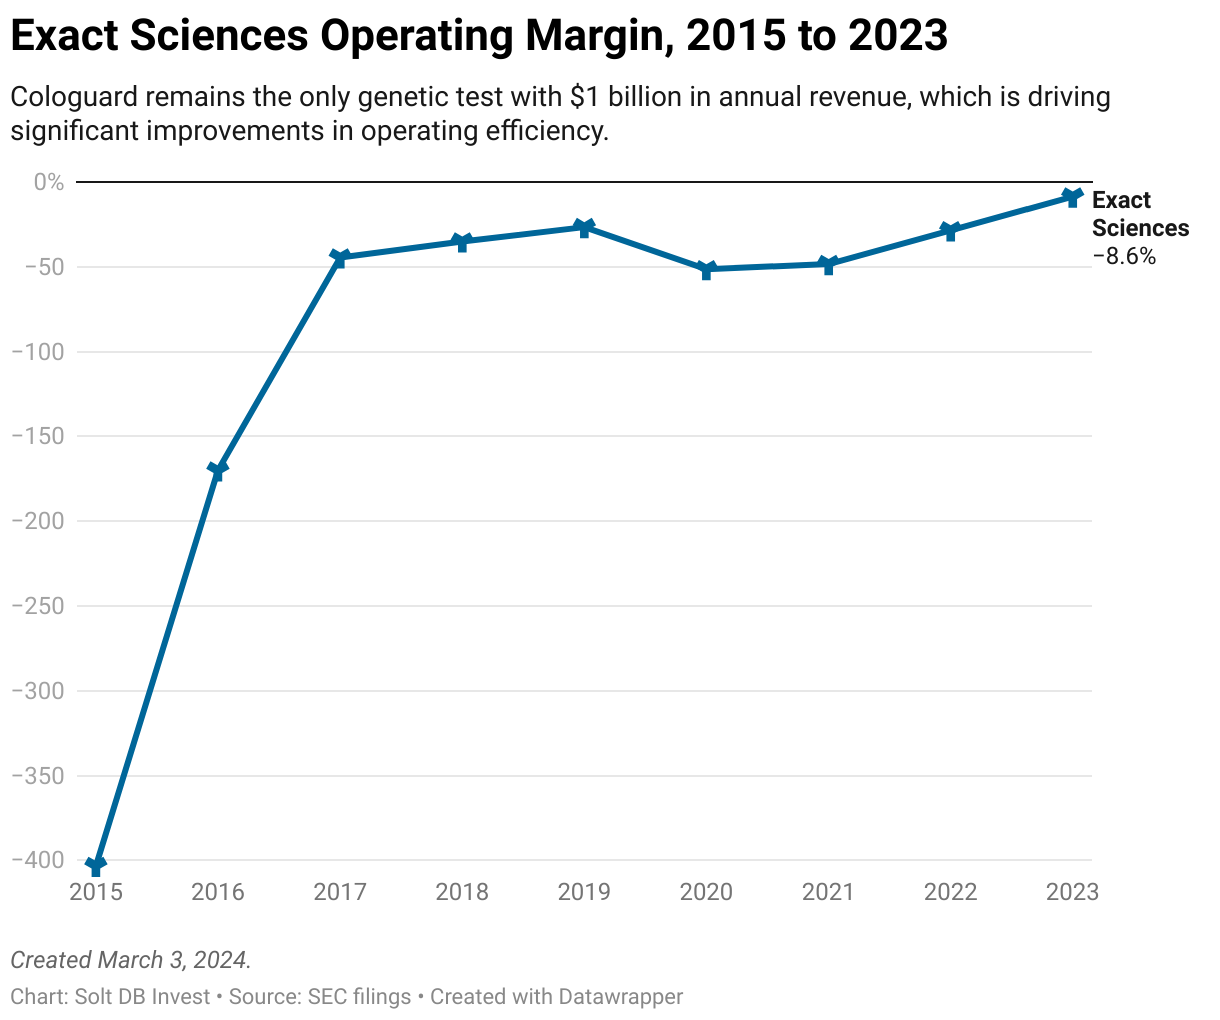 A line chart showing operating margin for Exact Sciences from 2015 to 2023.